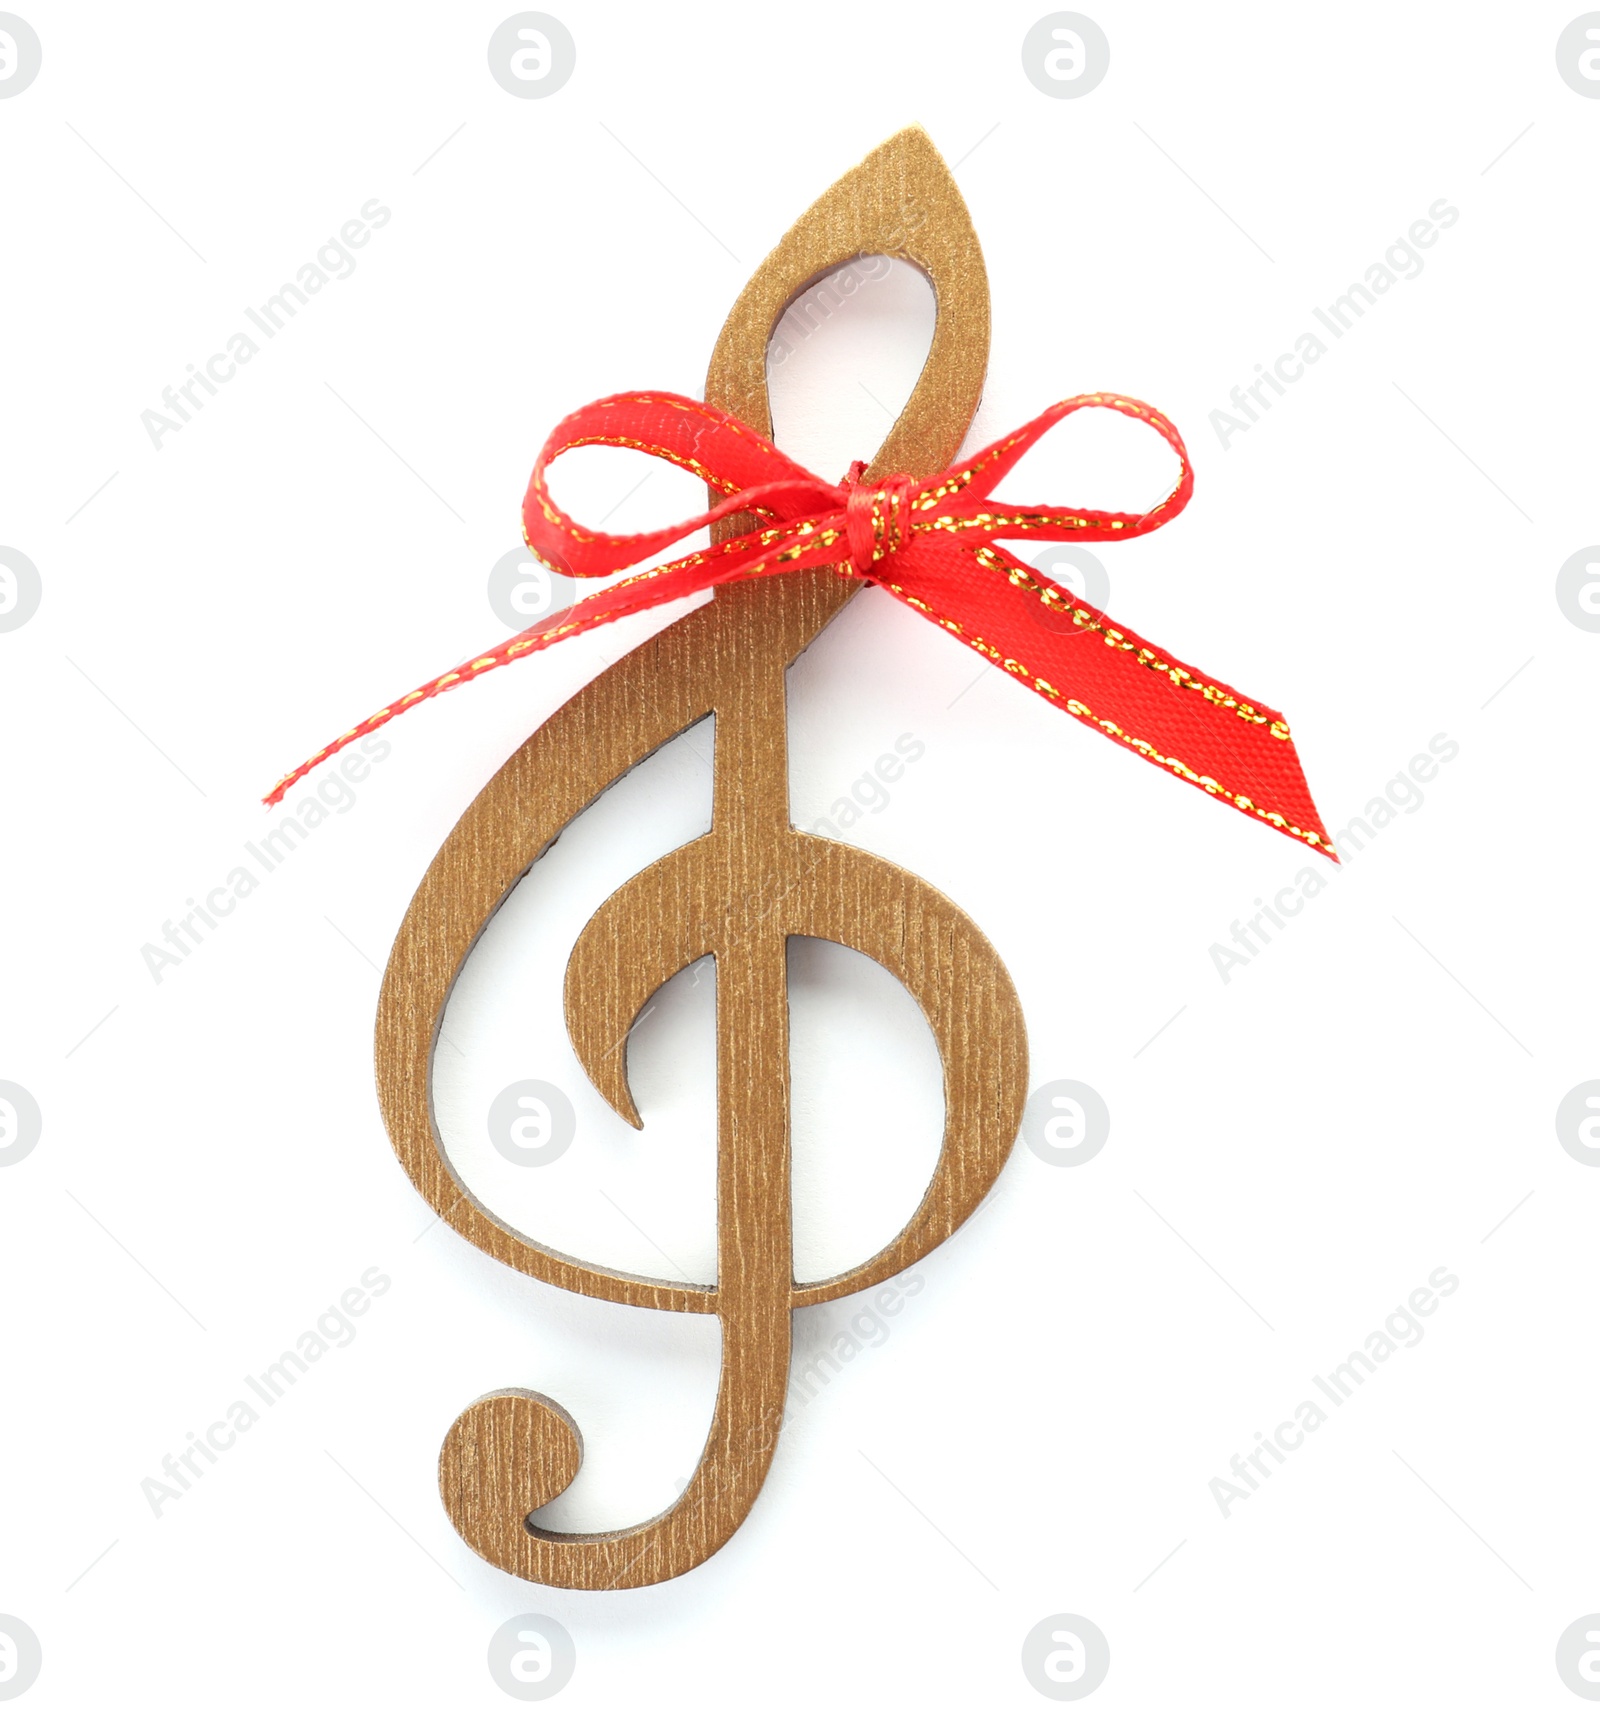 Photo of Wooden treble clef with red bow knot on white background. Christmas music concept